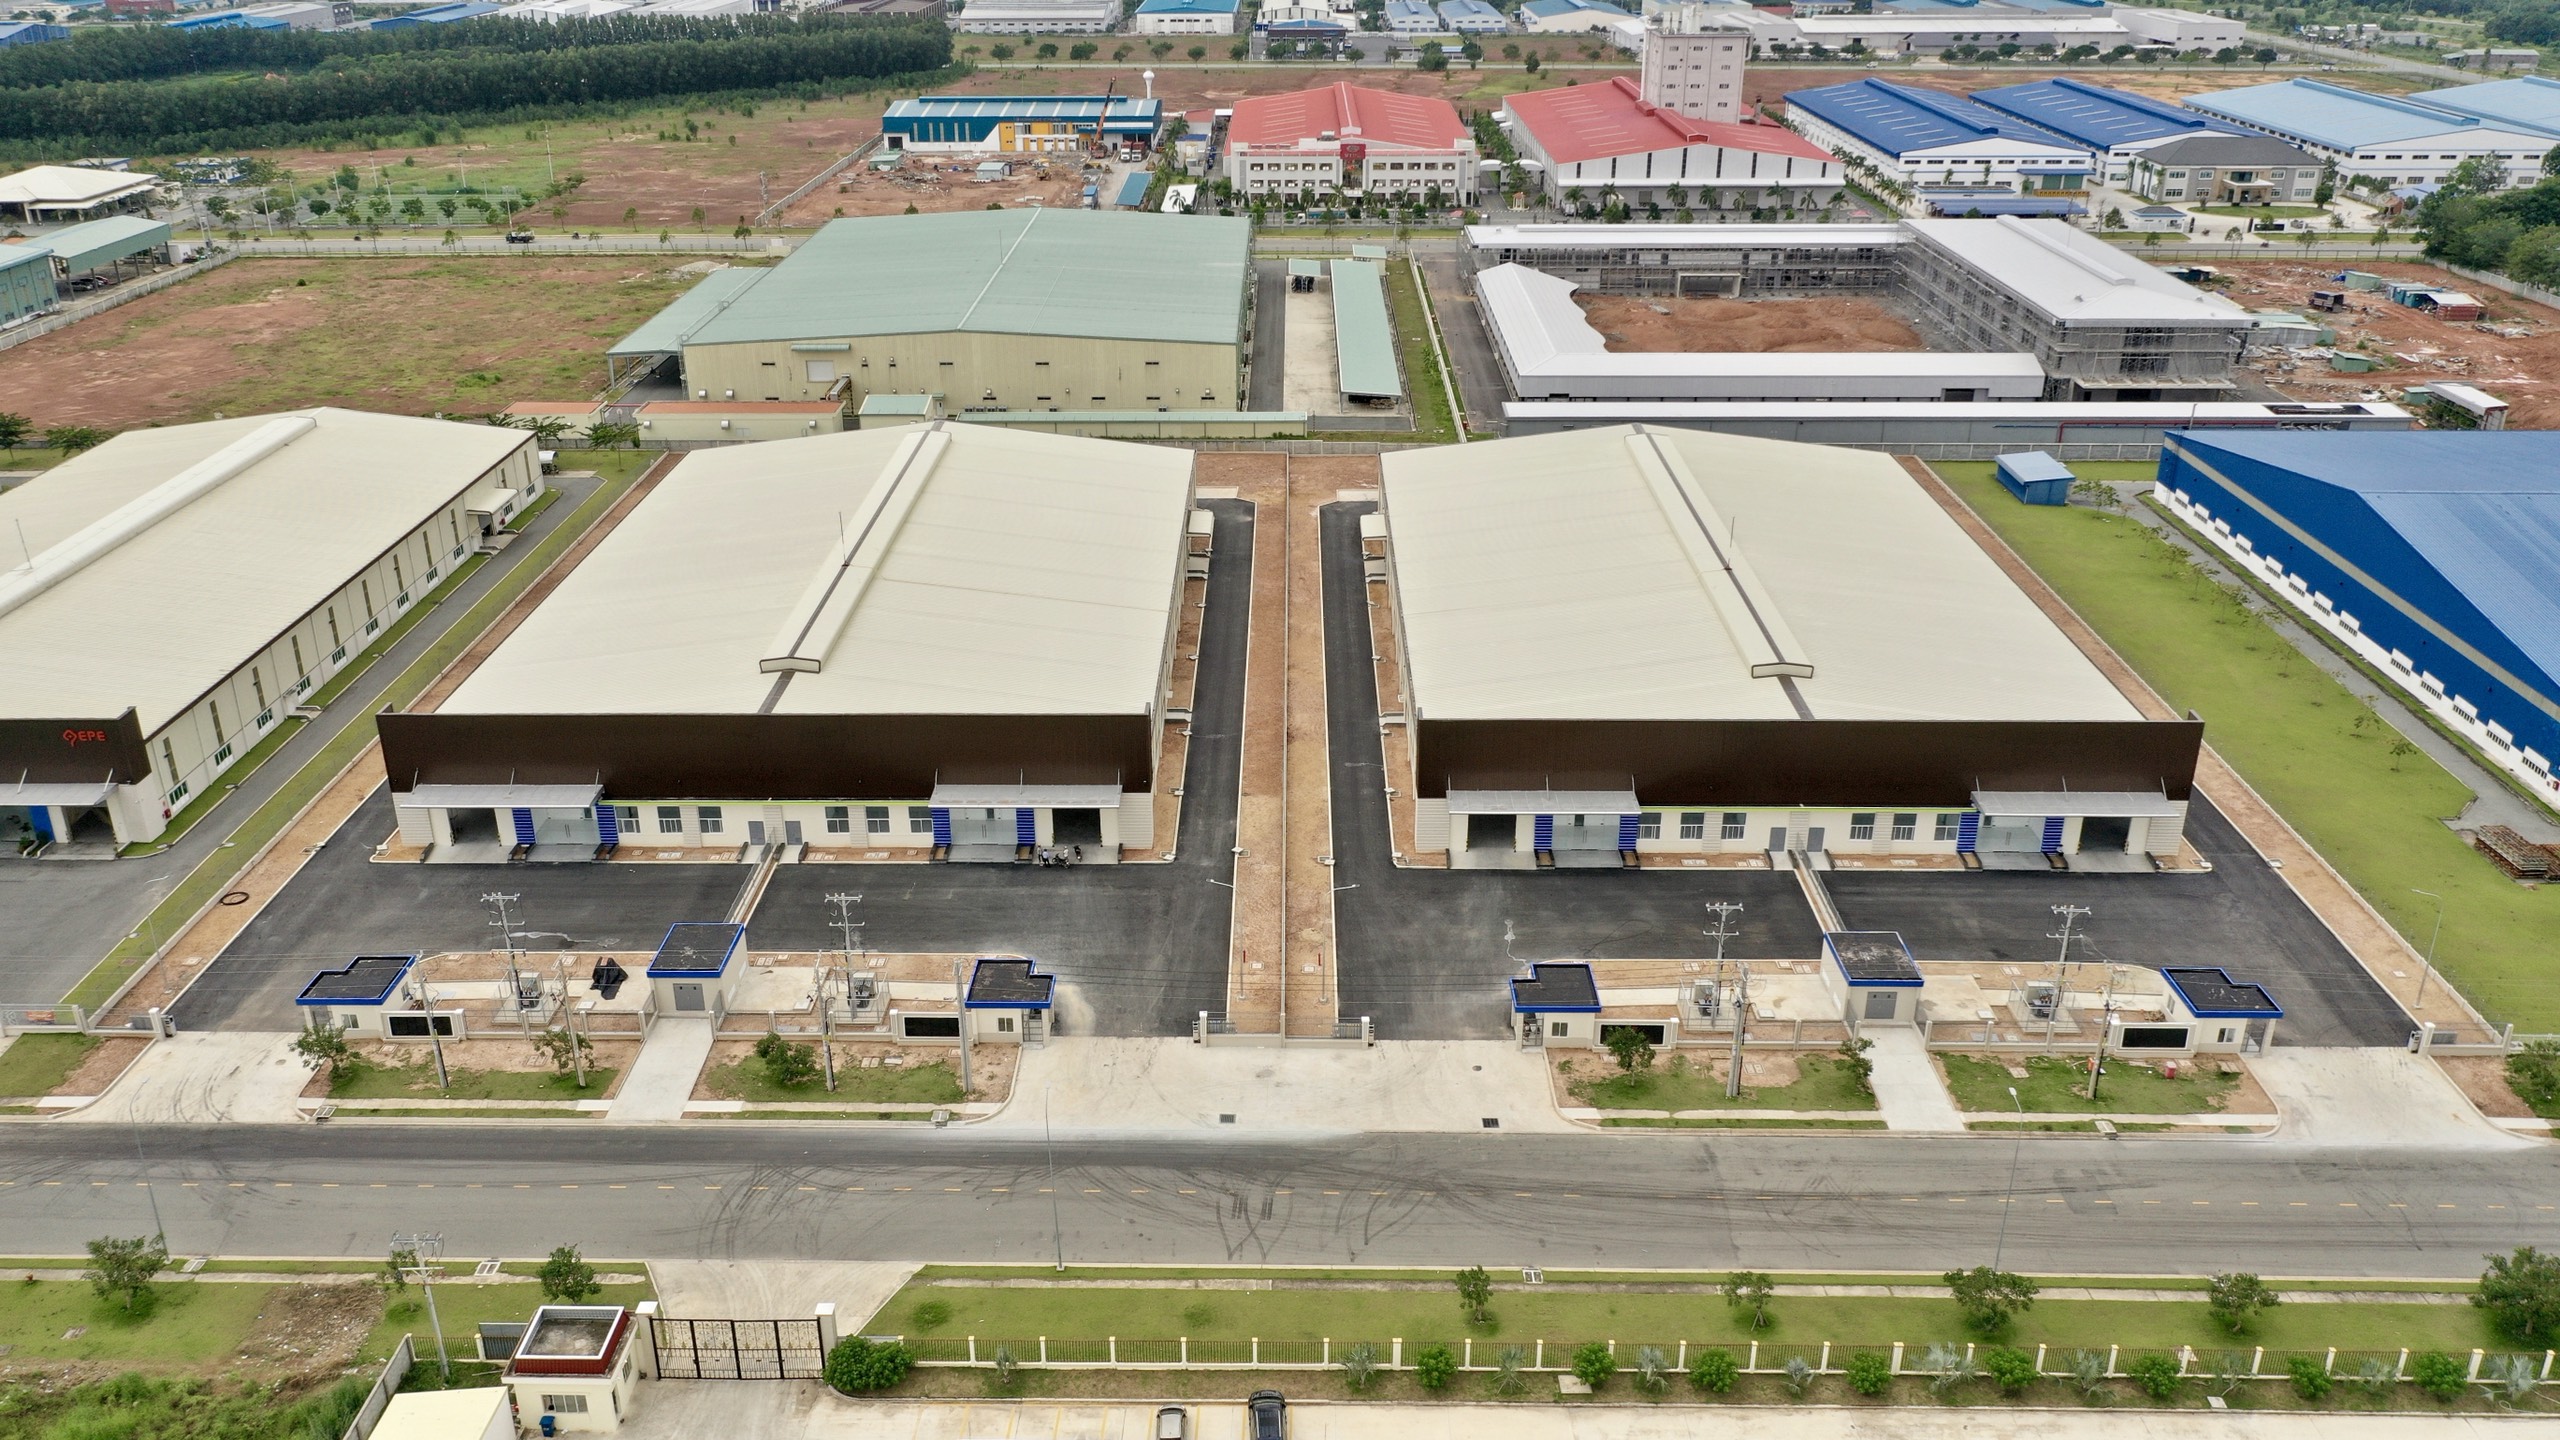 Factory land and industrial park